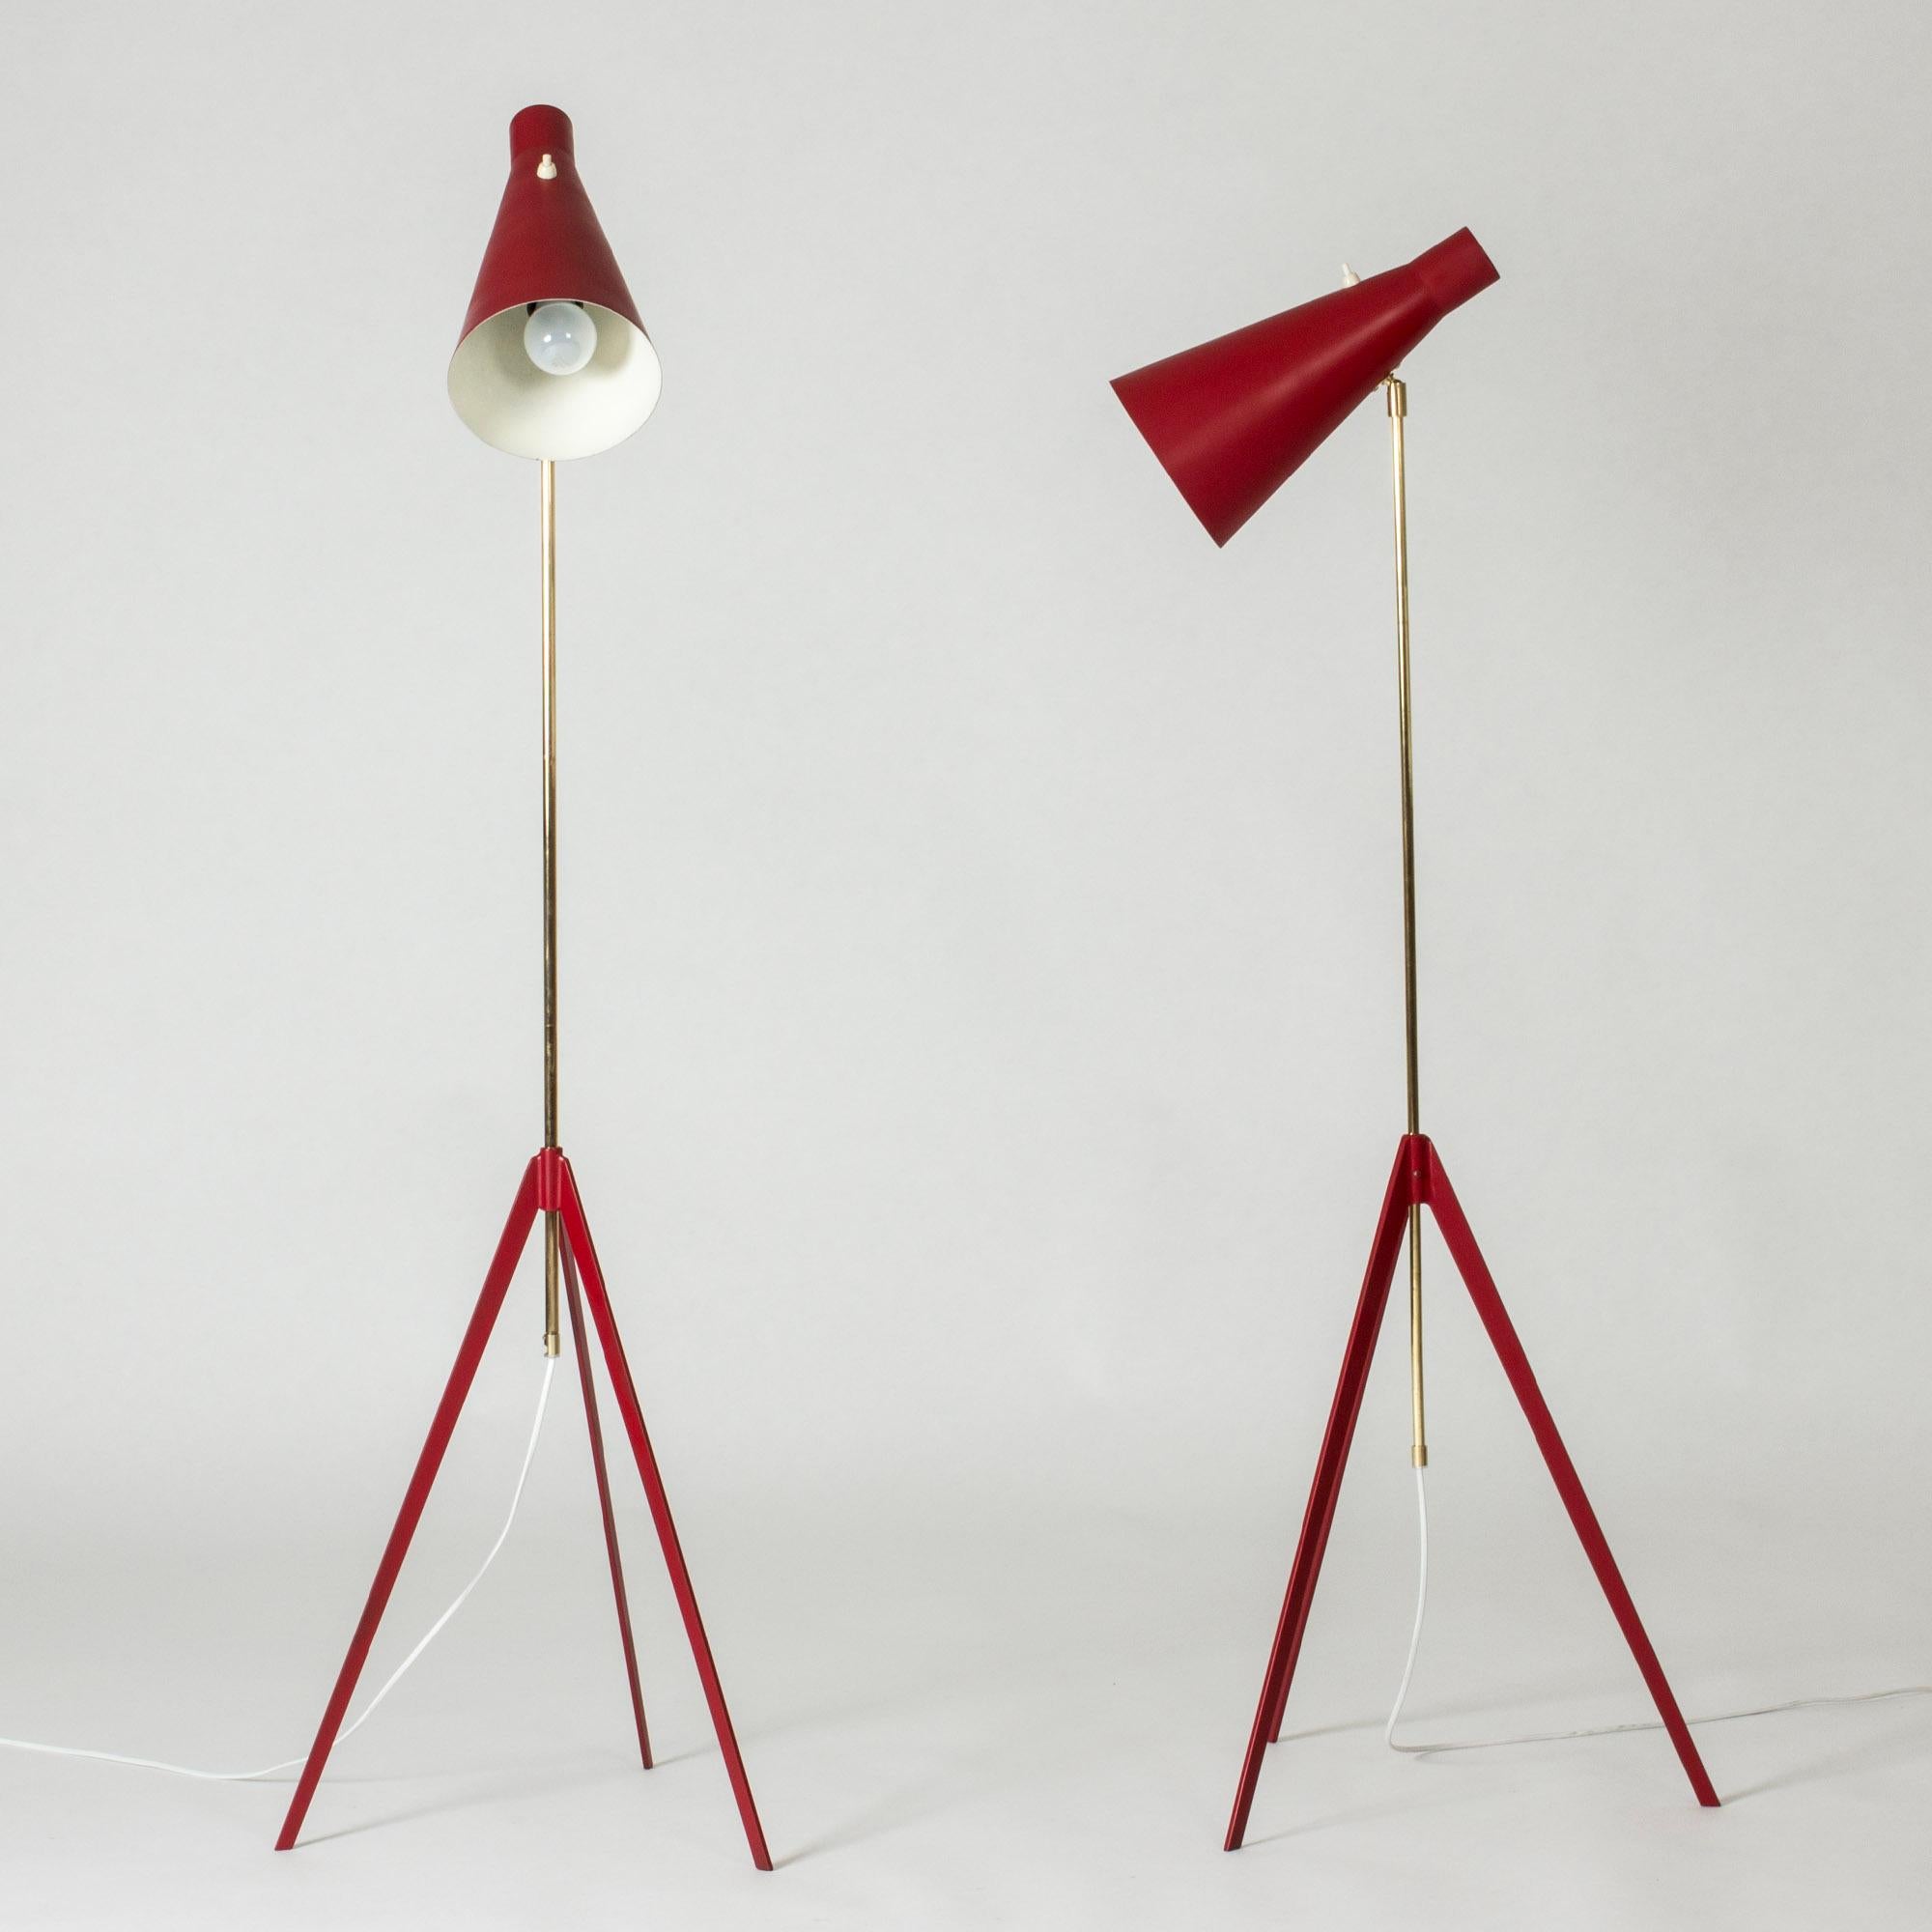 Pair of very cool brass and red lacquered metal floors lamp by Alf Svensson. Minimalistic, distinct design with a sharp-cut tripod bases.